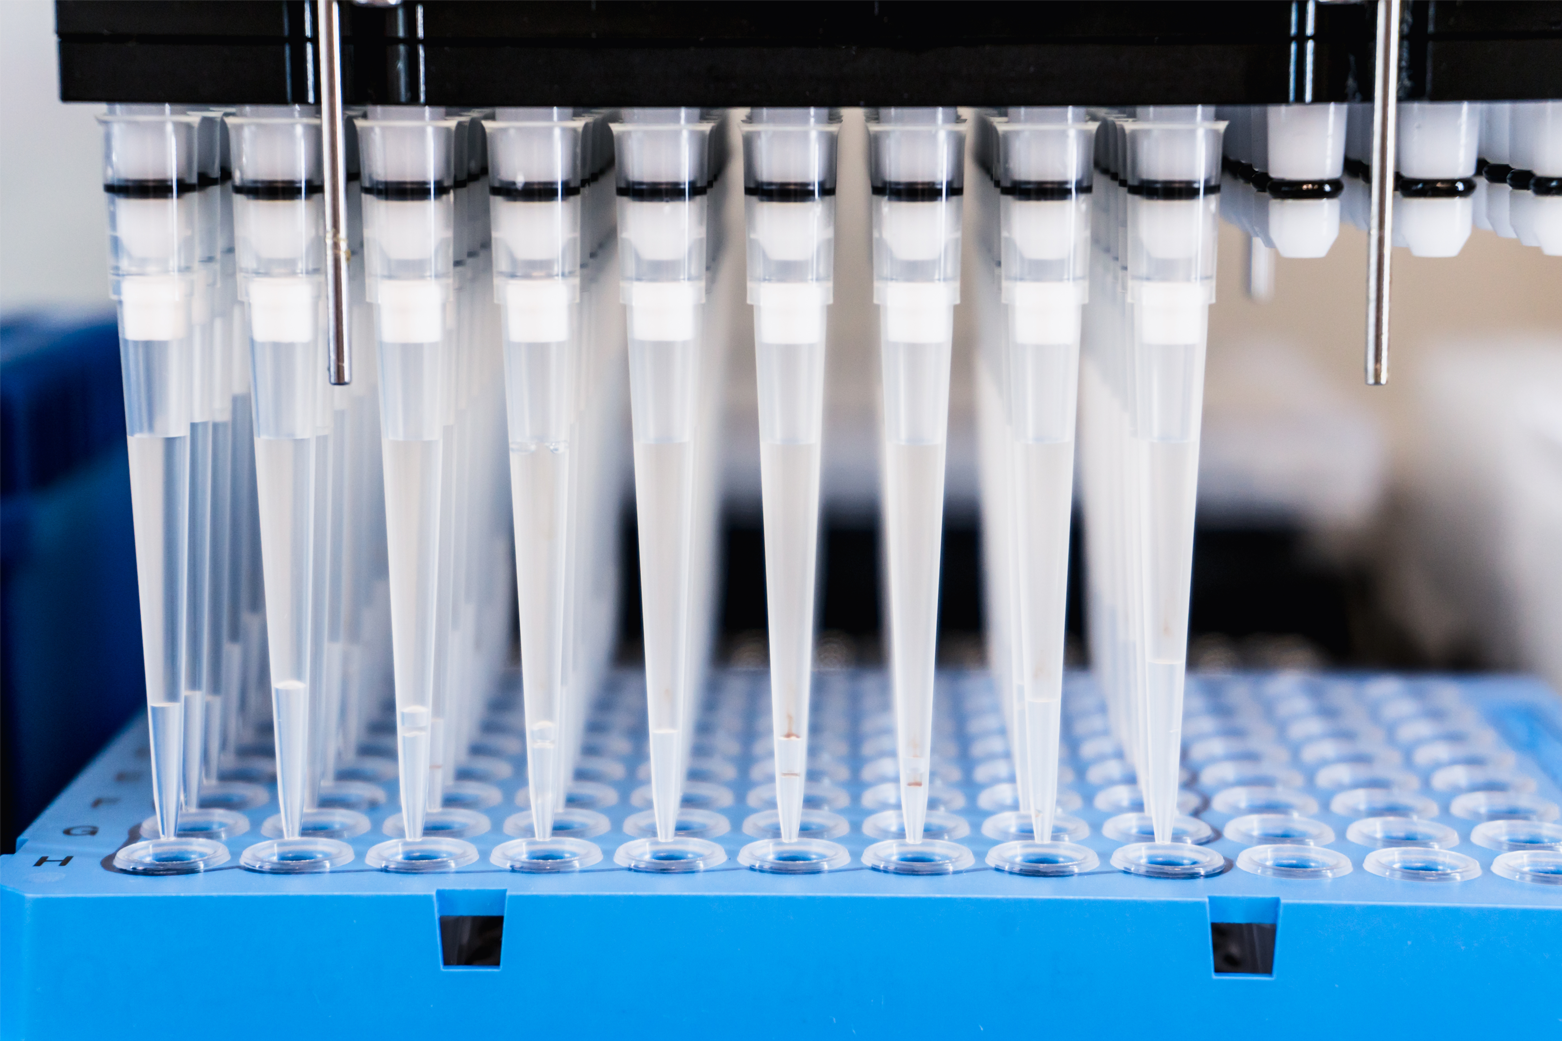 Using our cutting-edge platforms from Illumina, PacBio, ClearDX and more, we can customize Next Generation Sequencing services to fit your requirements, whether they involve “off the shelf kits” or bespoke panels.